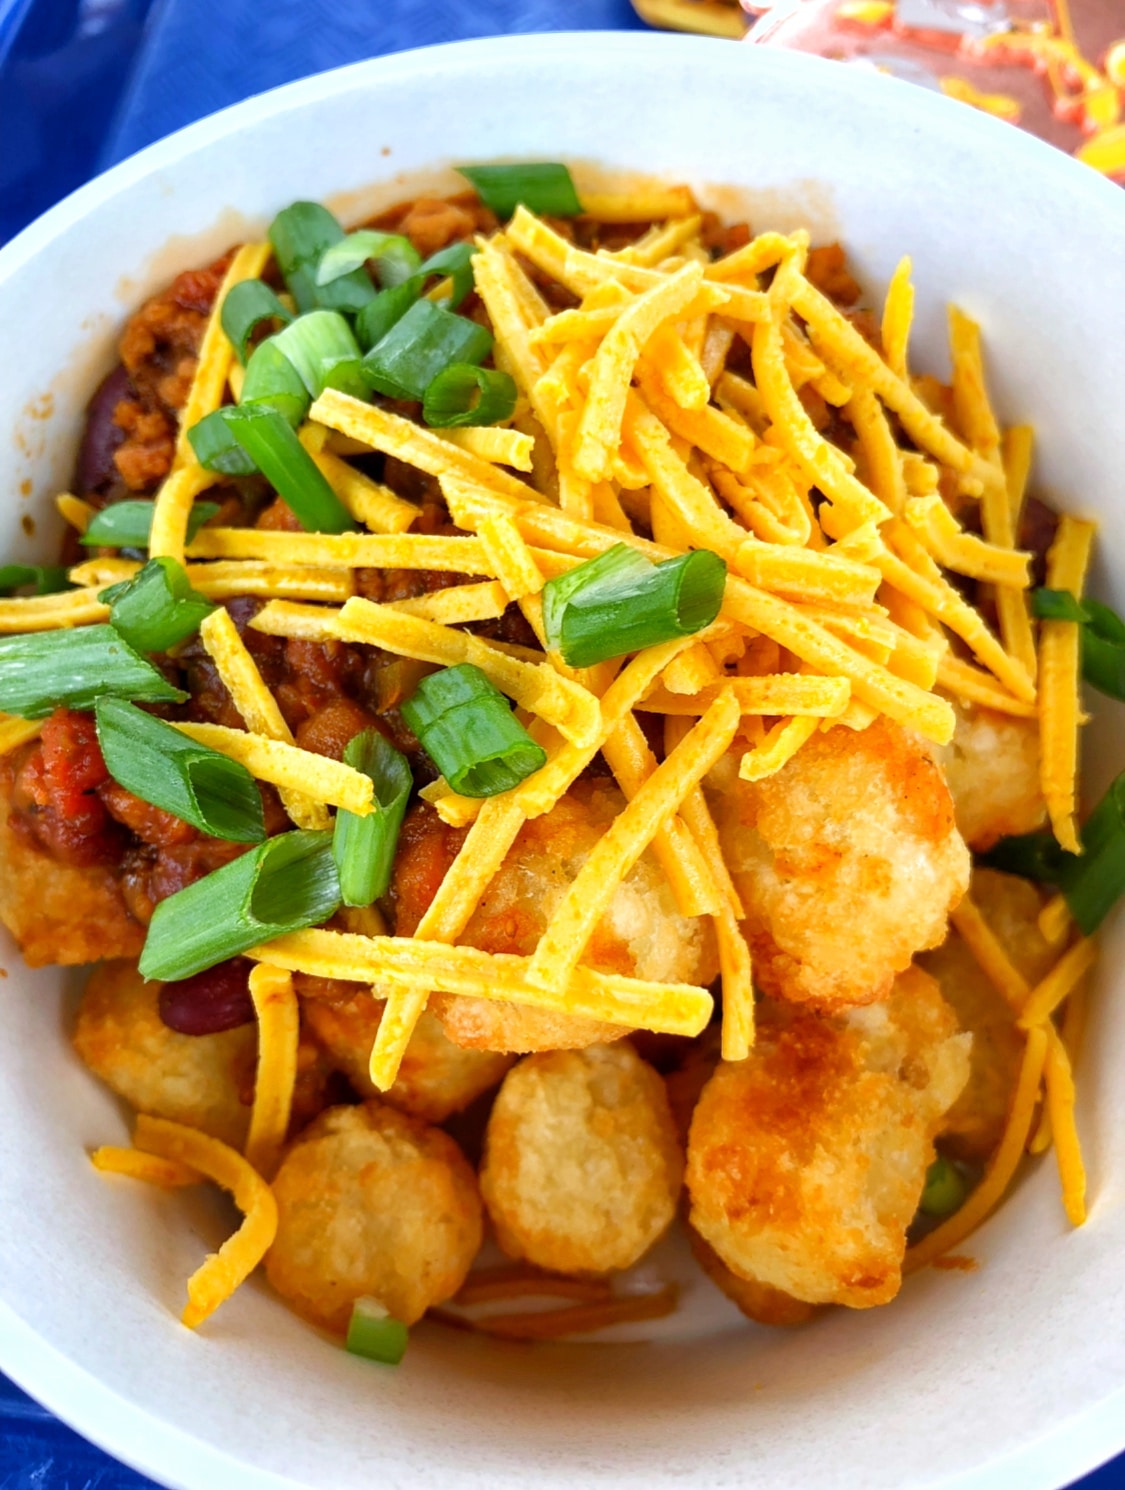 Vegan Totchos at Woody’s Lunch Box in Toy Story Land at Disney’s Hollywood Studios